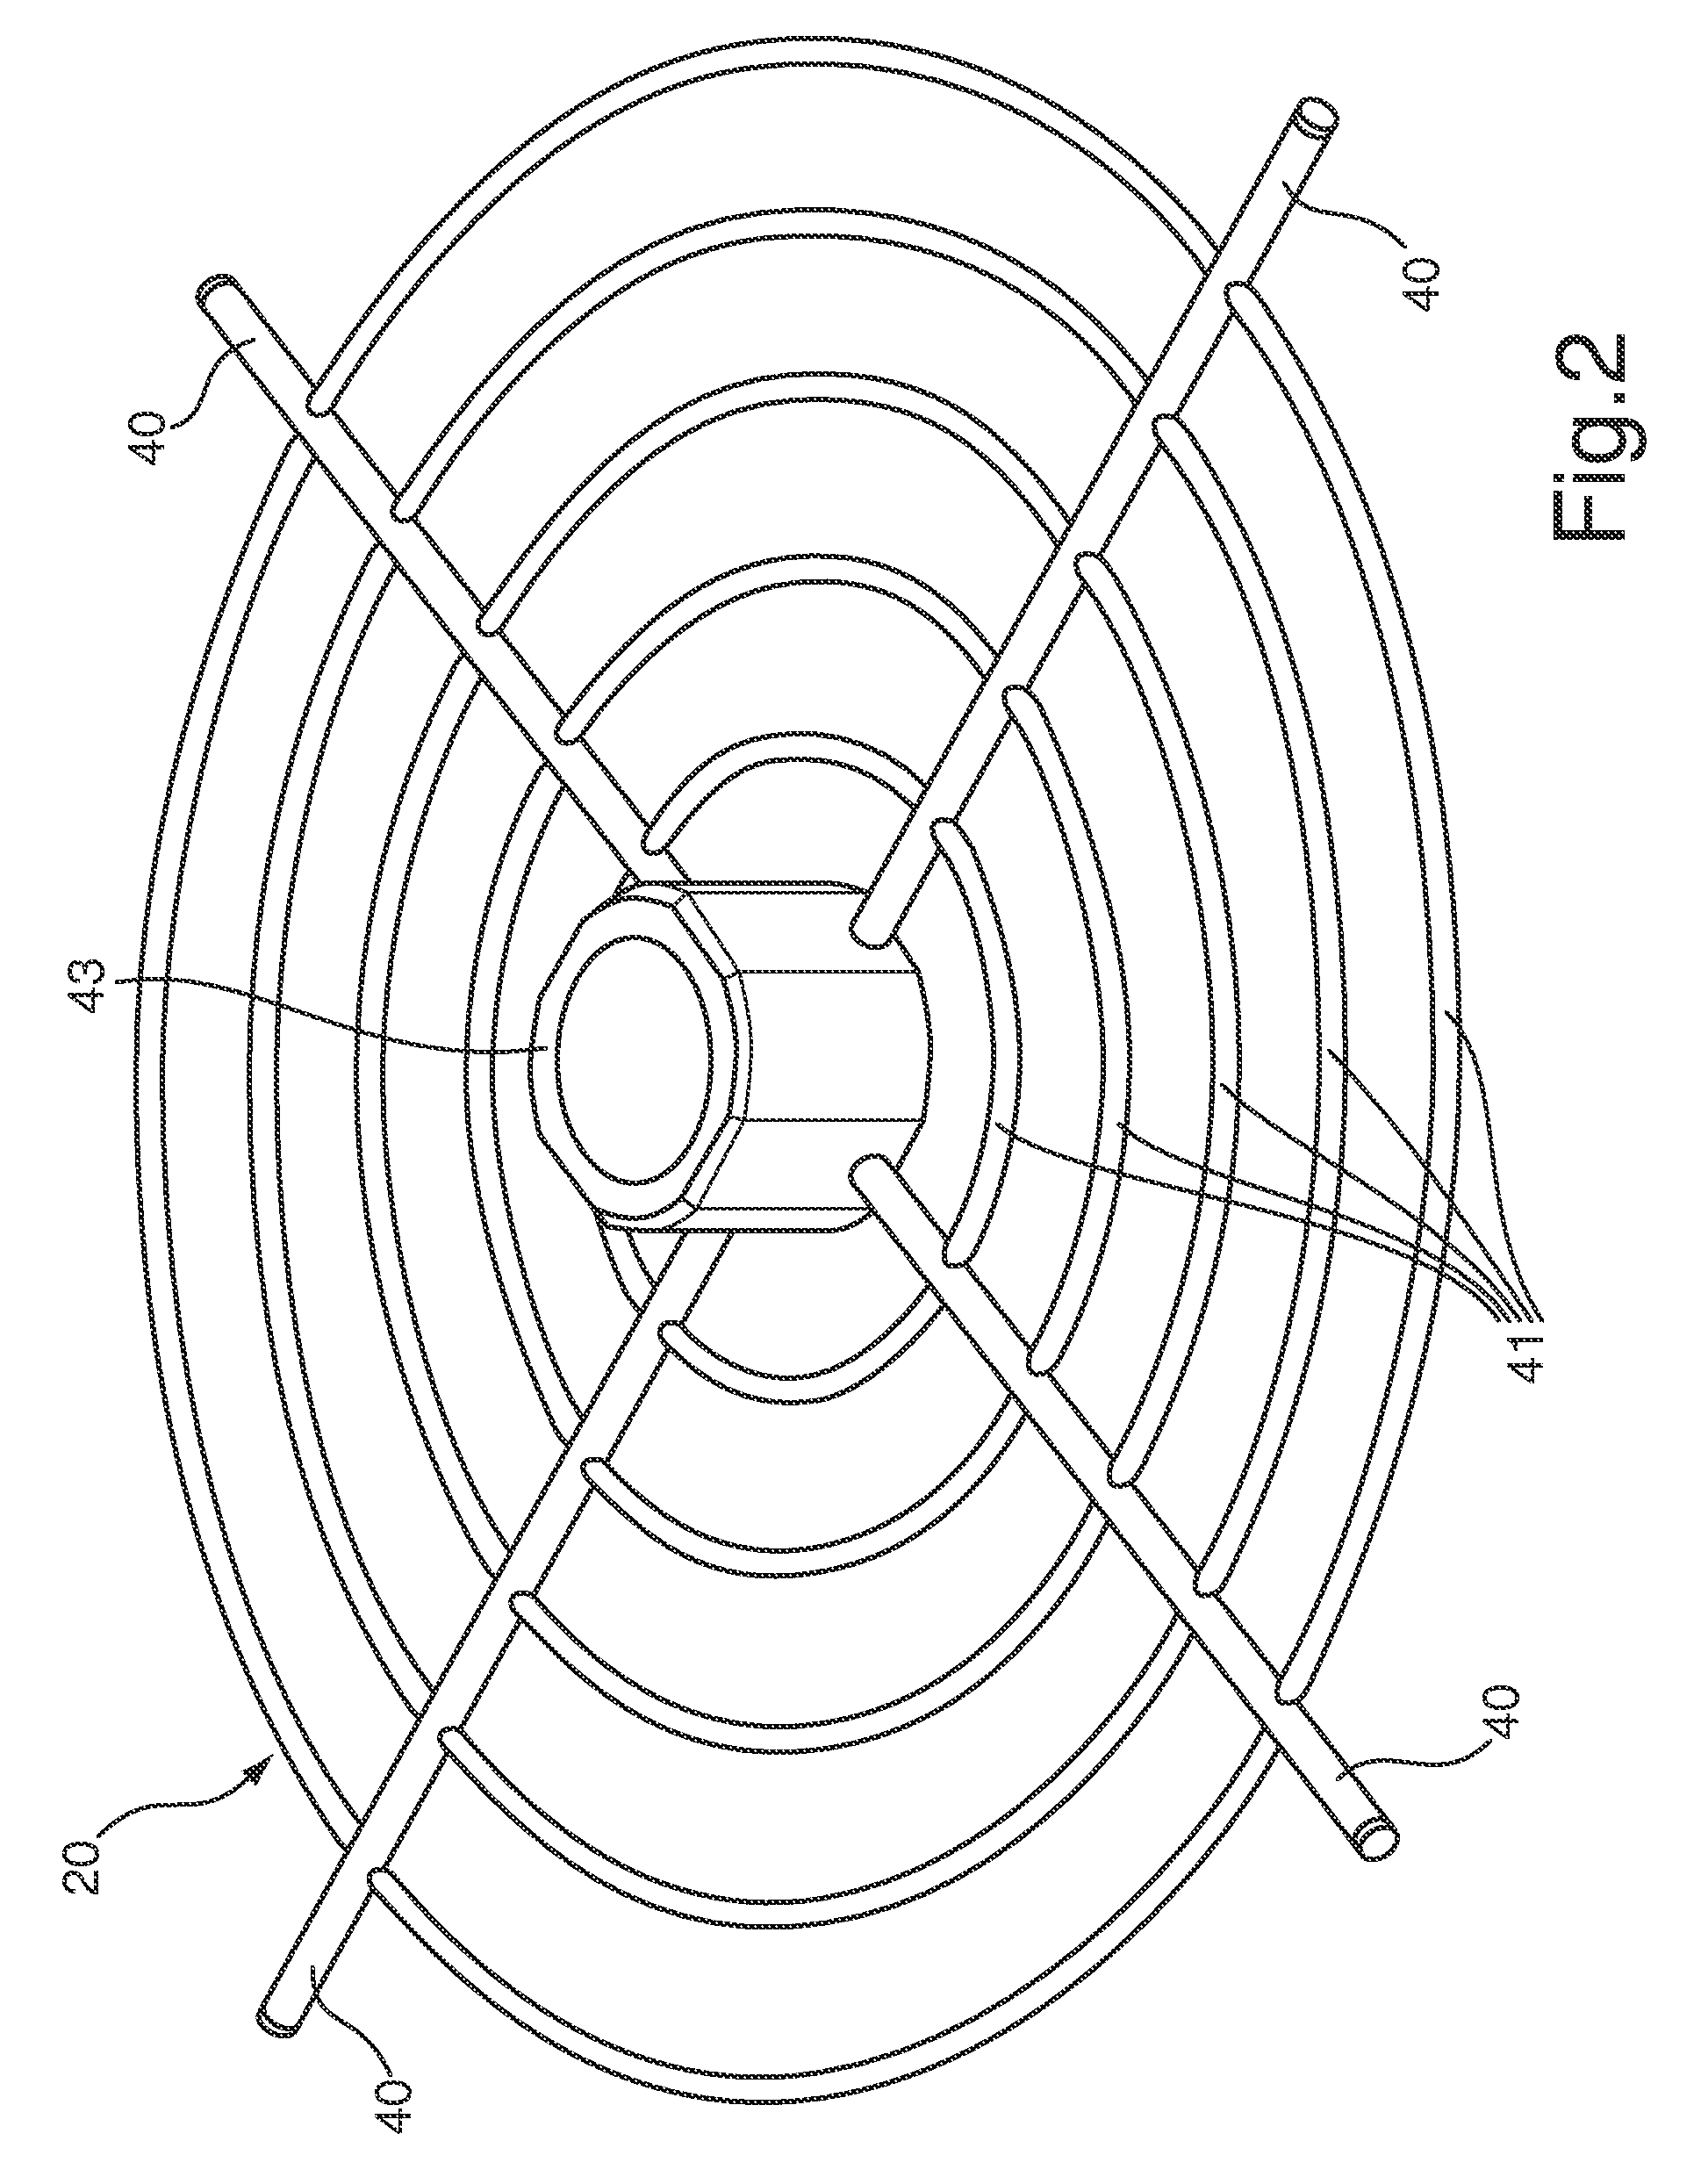 Device for cleaning oxidized or corroded components in the presence of a halogenous gas mixture